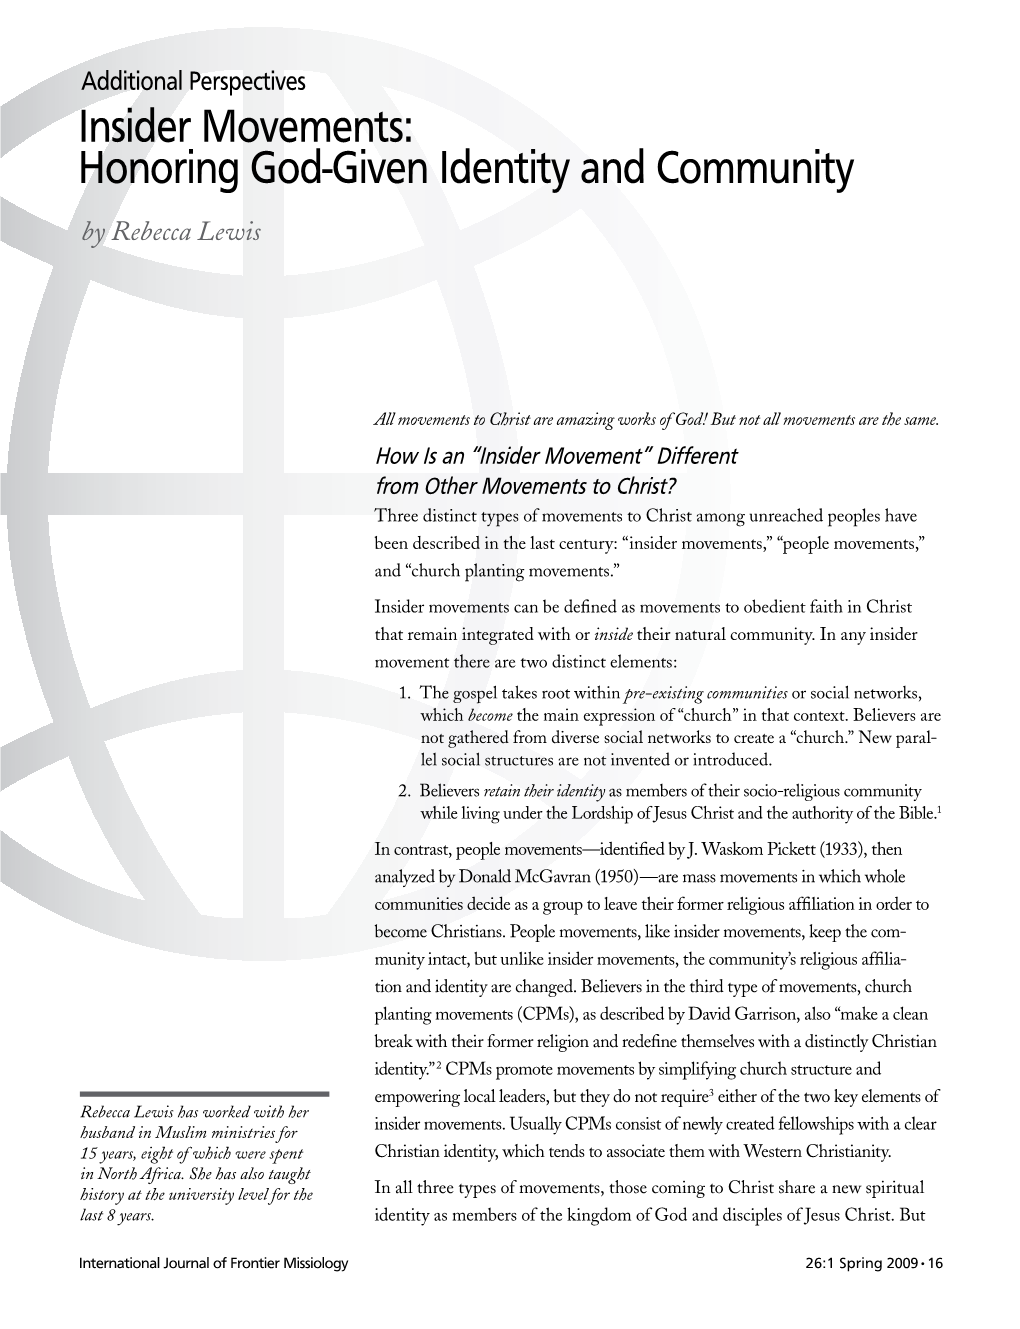 Insider Movements: Honoring God-Given Identity and Community